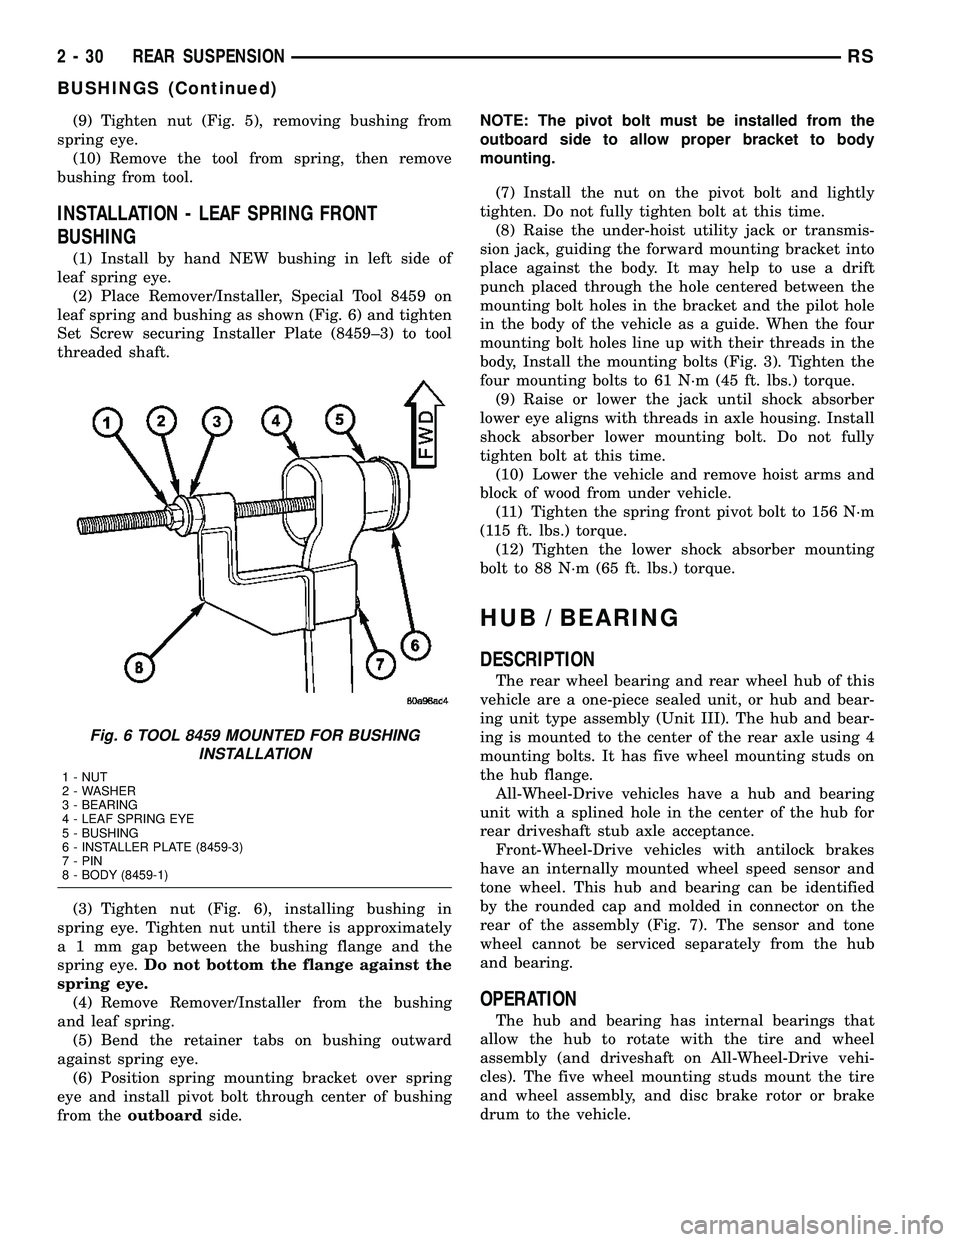 DODGE TOWN AND COUNTRY 2004  Service Manual (9) Tighten nut (Fig. 5), removing bushing from
spring eye.
(10) Remove the tool from spring, then remove
bushing from tool.
INSTALLATION - LEAF SPRING FRONT
BUSHING
(1) Install by hand NEW bushing in